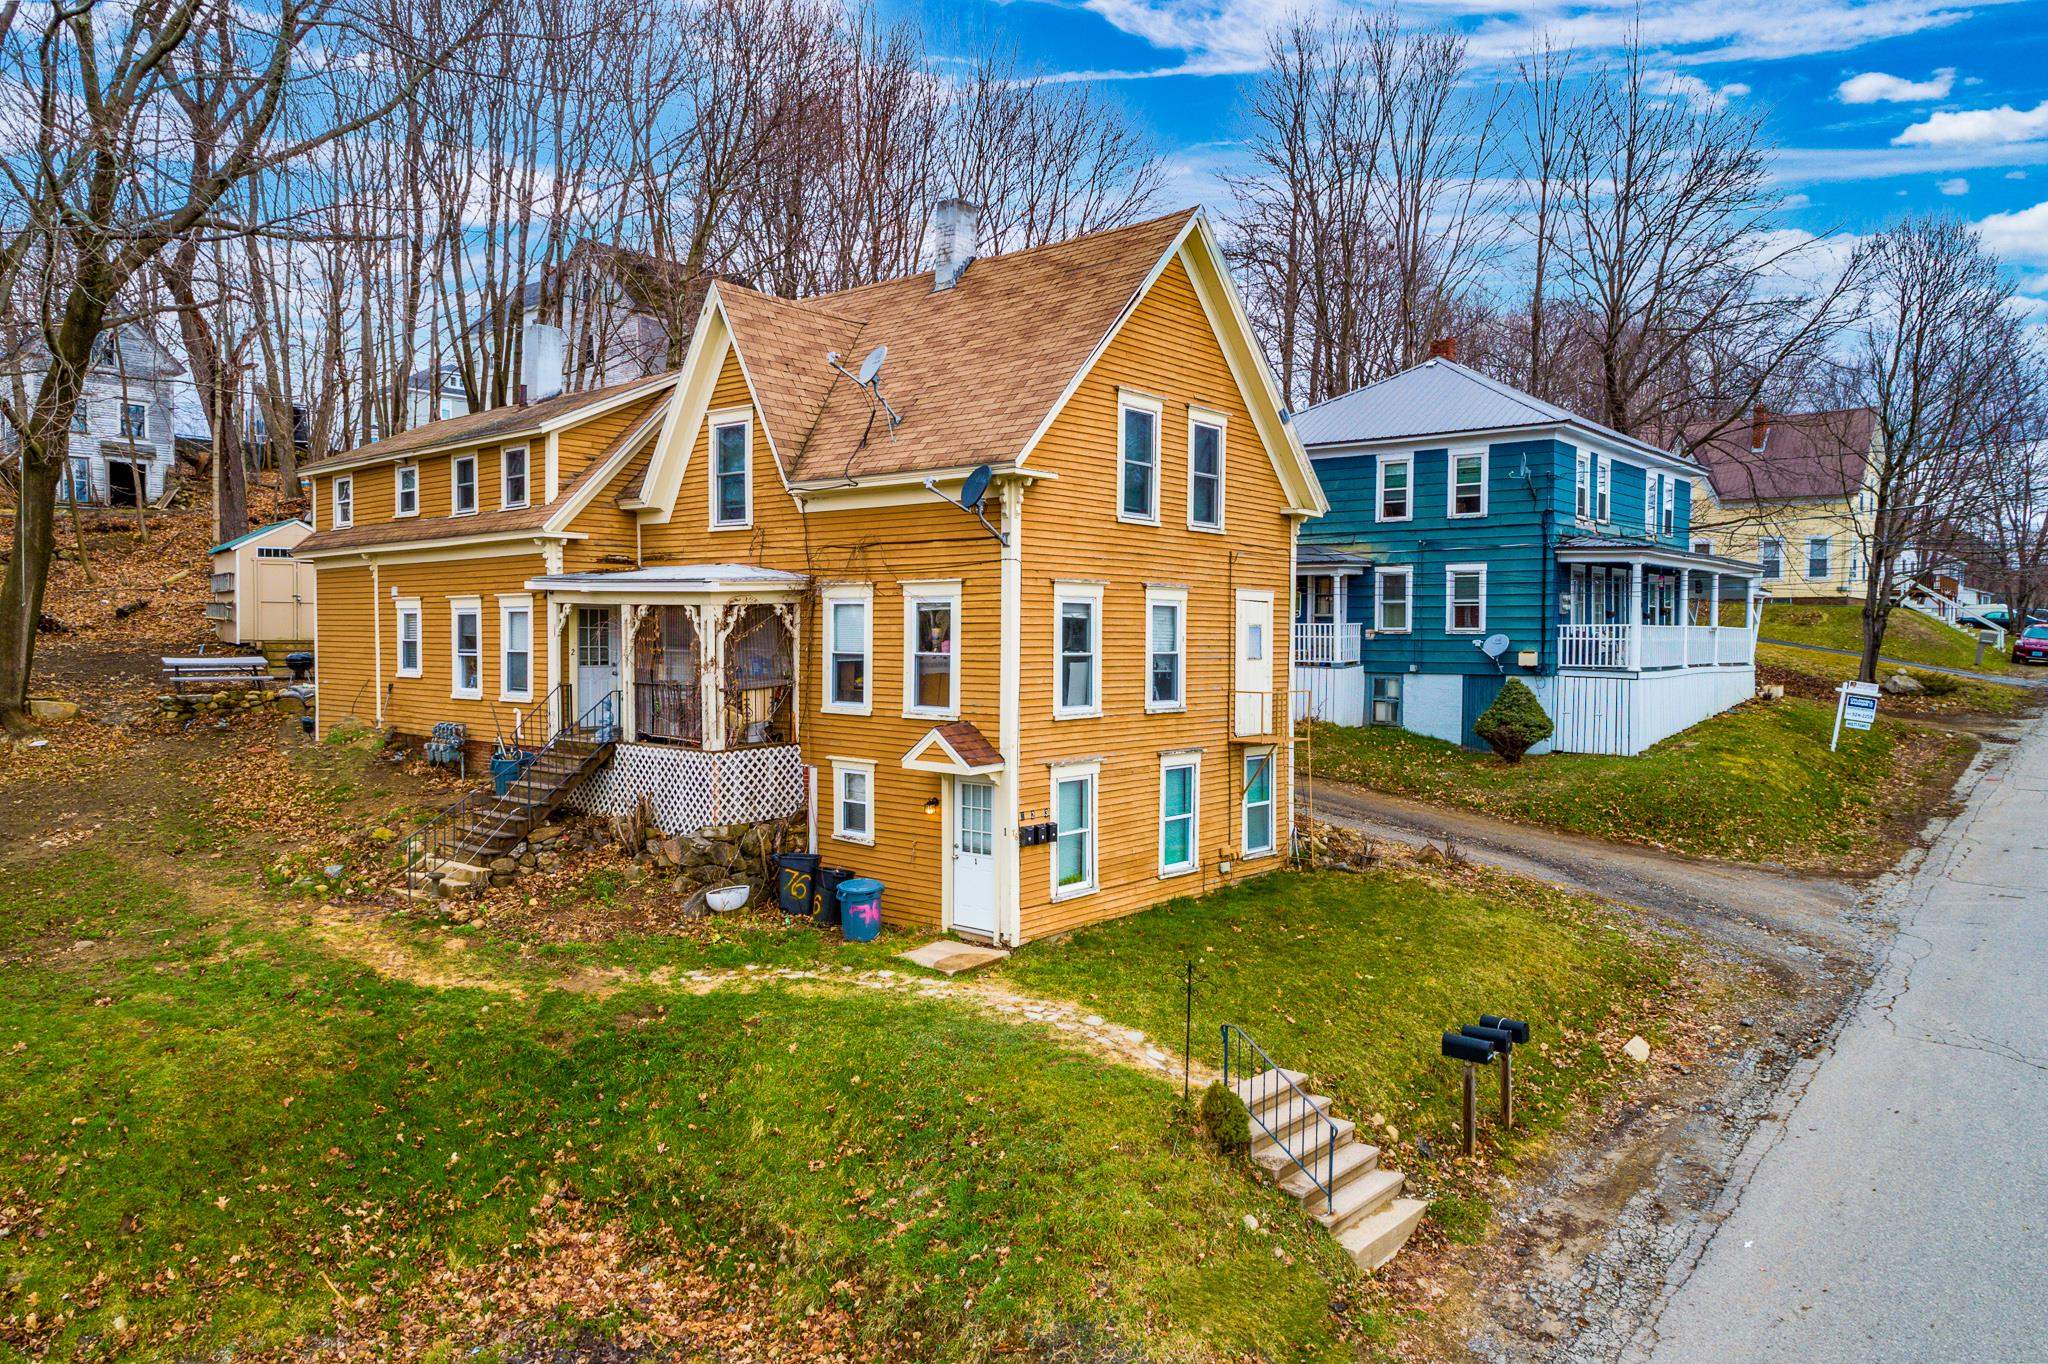 LACONIA NH Multi Family Homes for sale